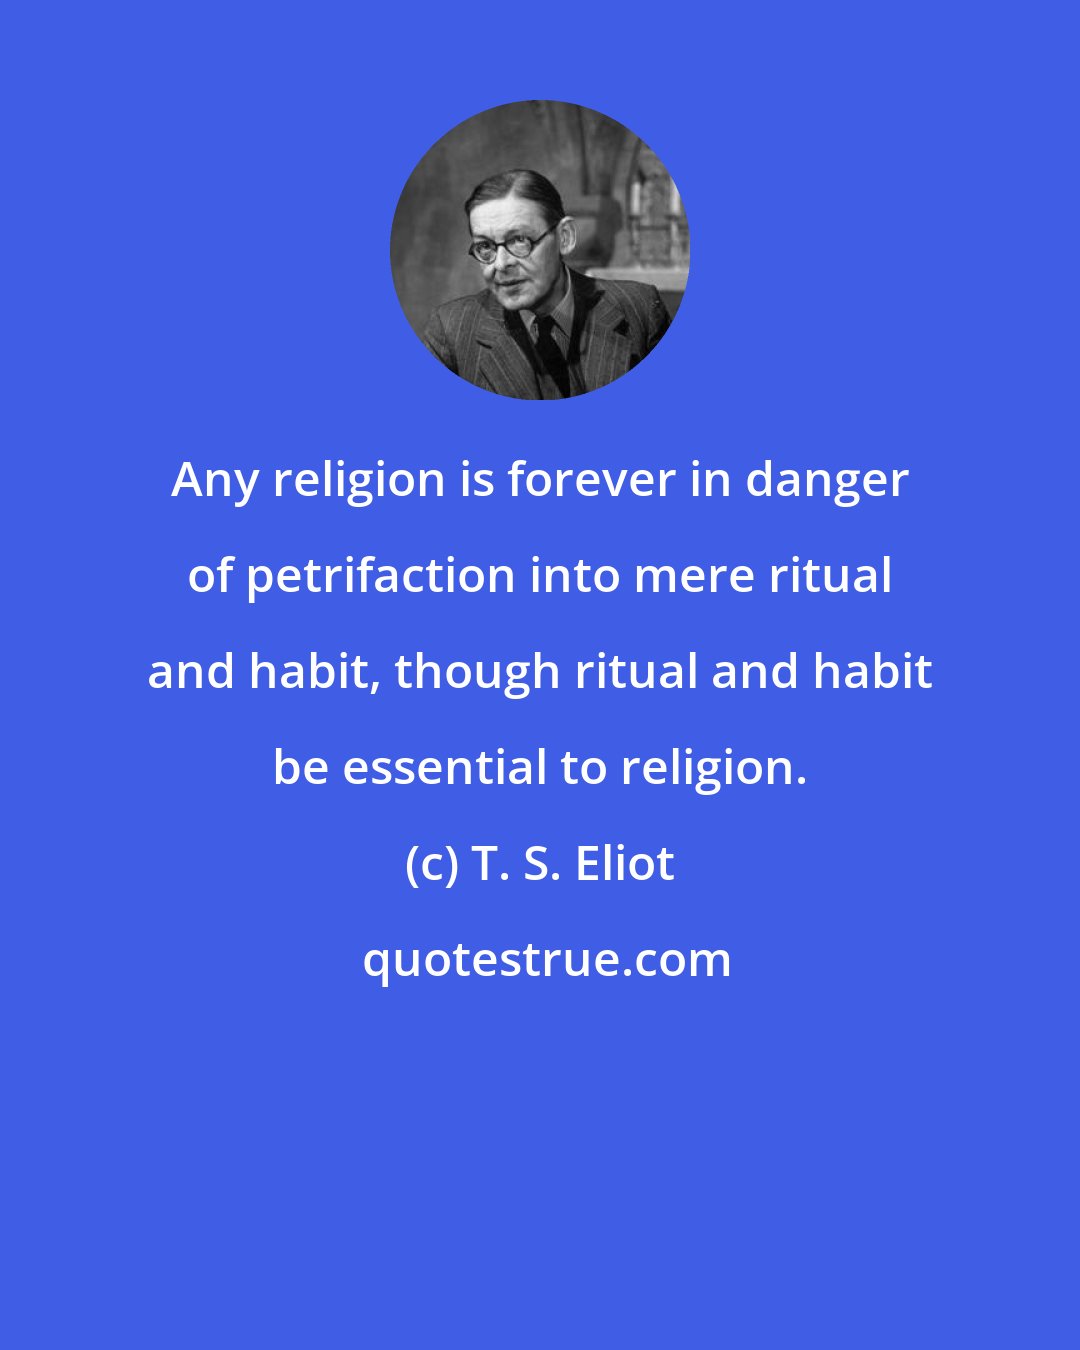 T. S. Eliot: Any religion is forever in danger of petrifaction into mere ritual and habit, though ritual and habit be essential to religion.